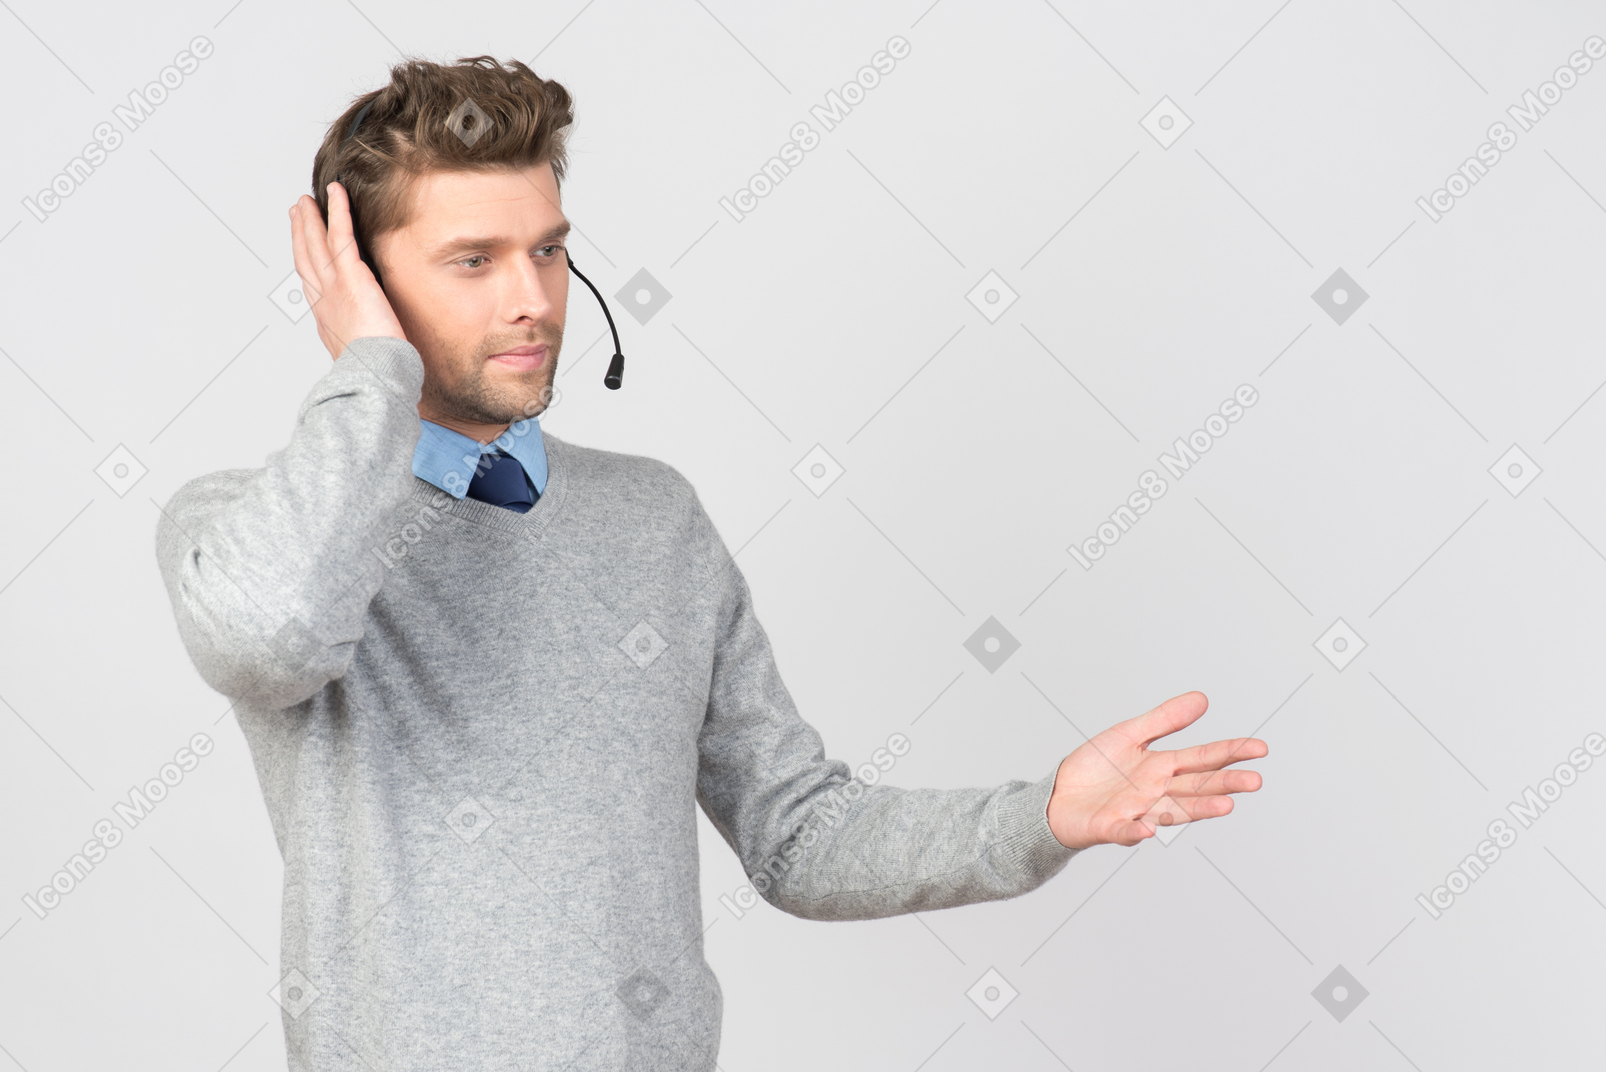 Call center agent touching headset